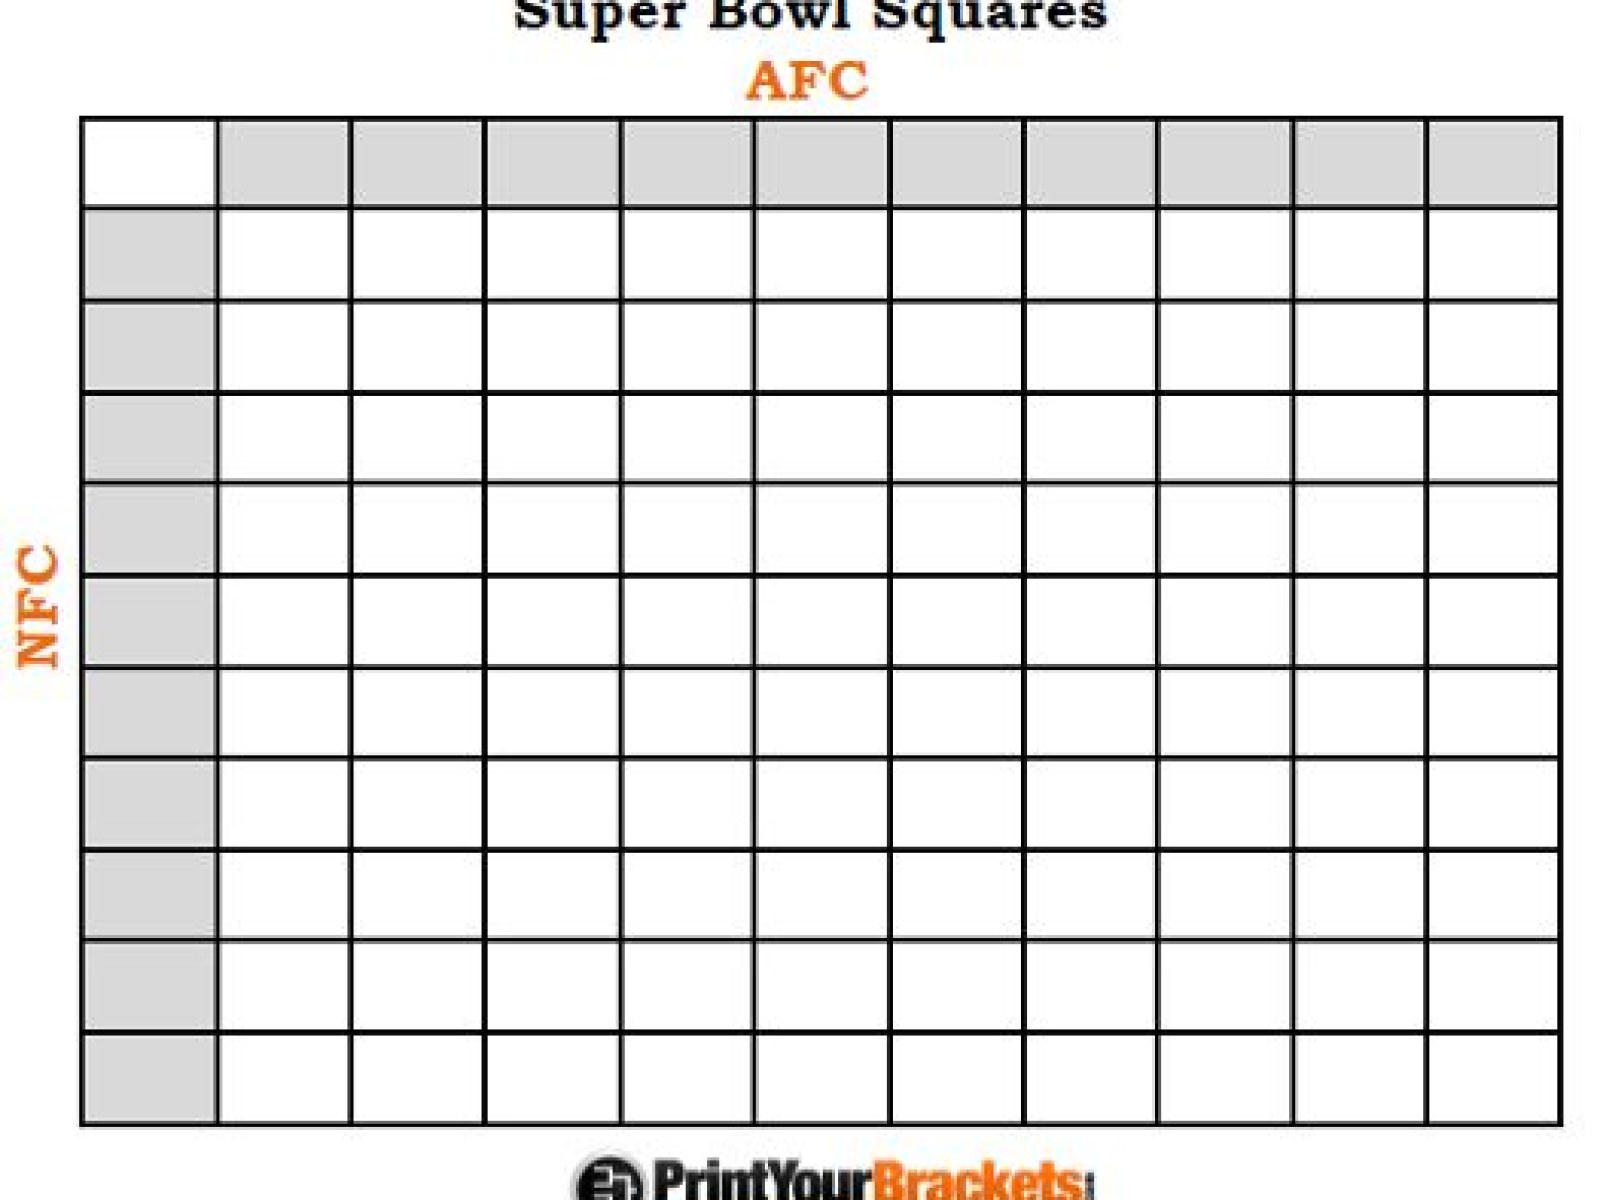 NFL Squares: Office Pool Betting Games, Advice And Rules 2015